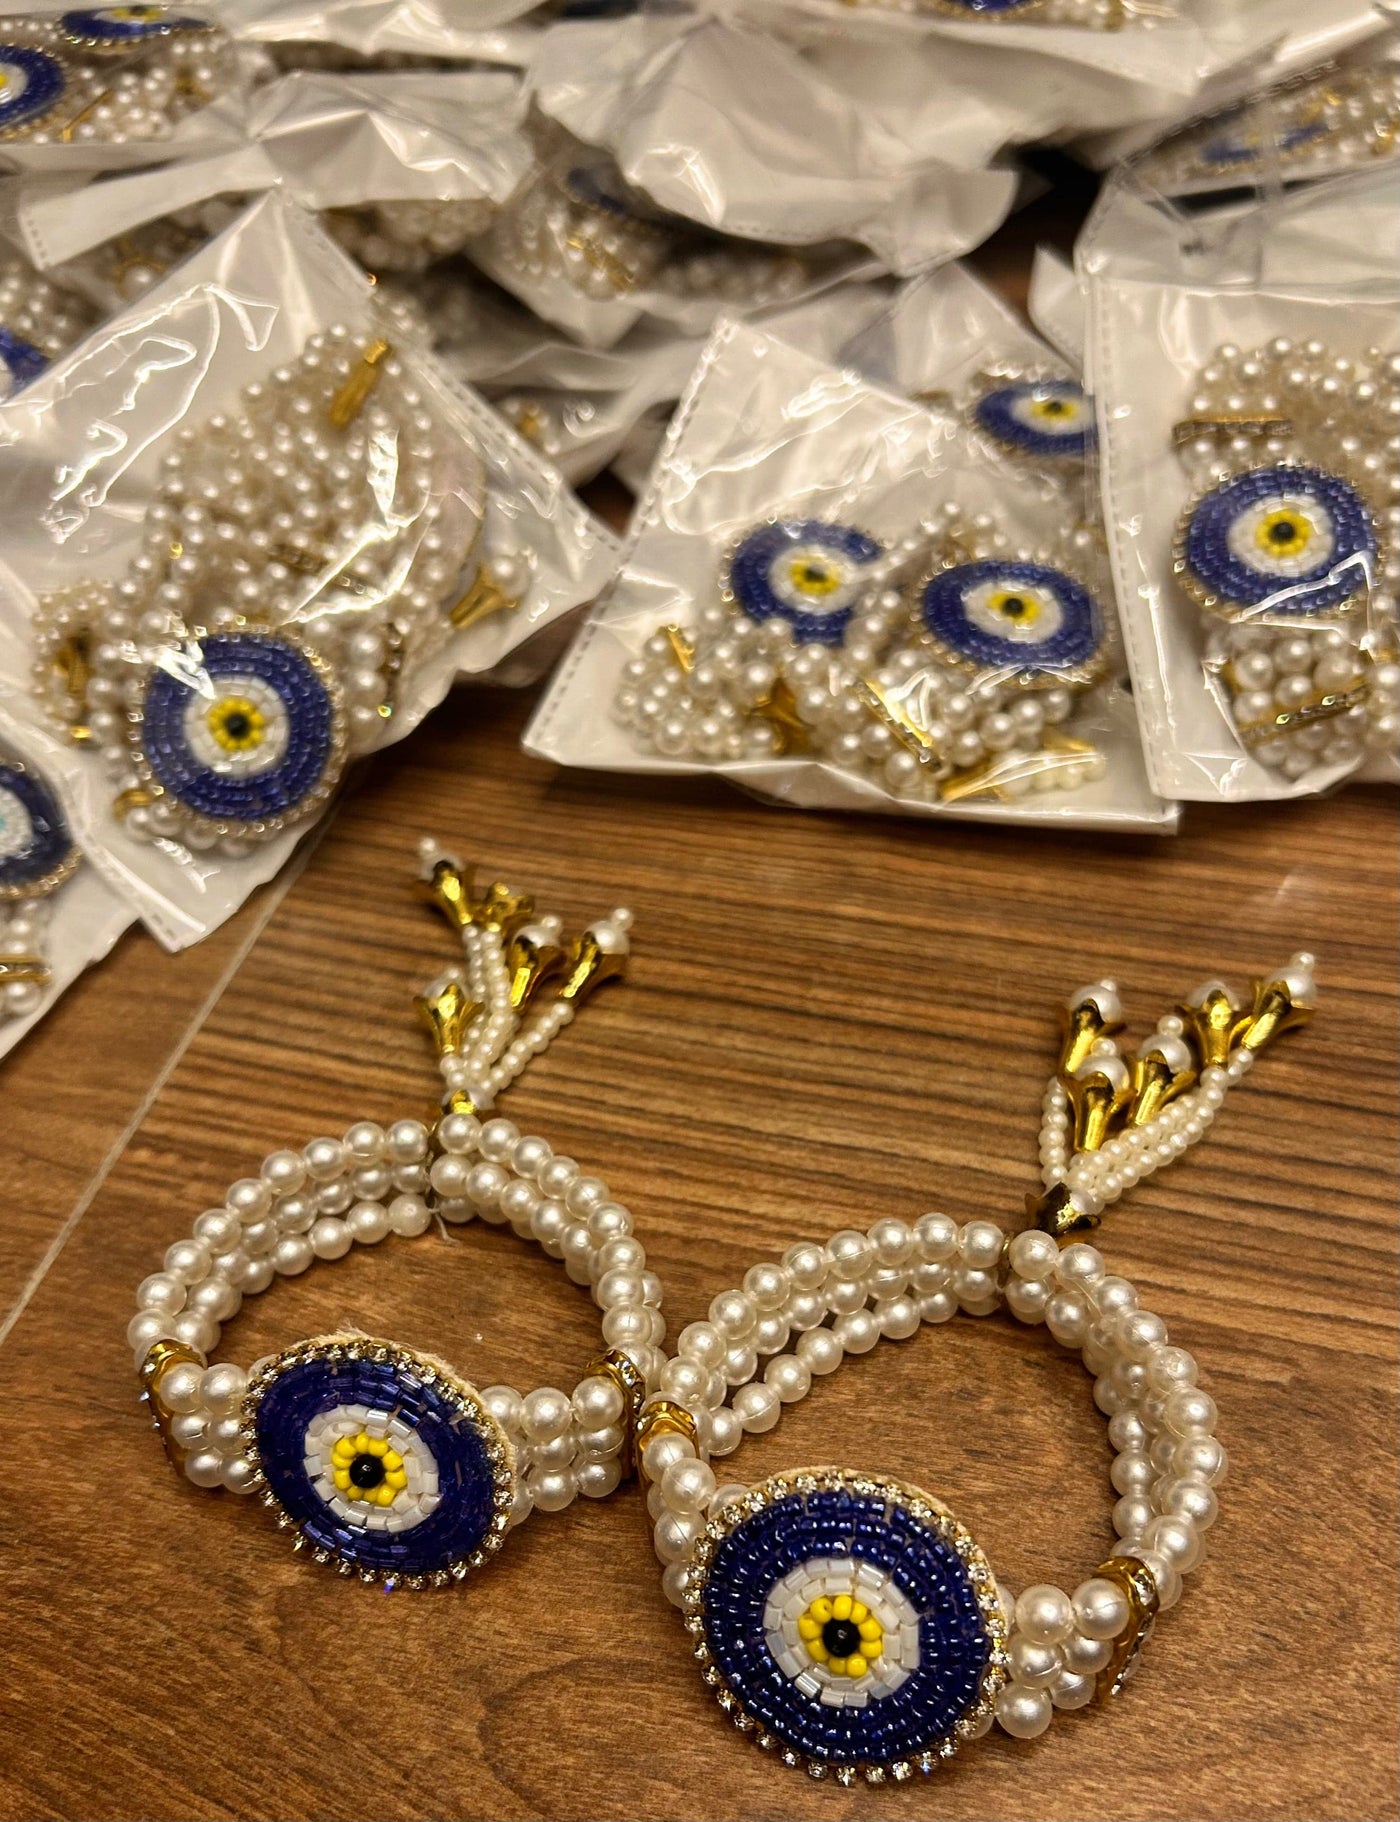 80 Rs pair on buying minimum 50 pairs | Whatsapp at 8619550223 evil eye bracelets LAMANSH Evil Eye 🧿 Rakhi Bracelets for giveaways 🎁 to bridesmaids and guests / Favors for ladies and gents